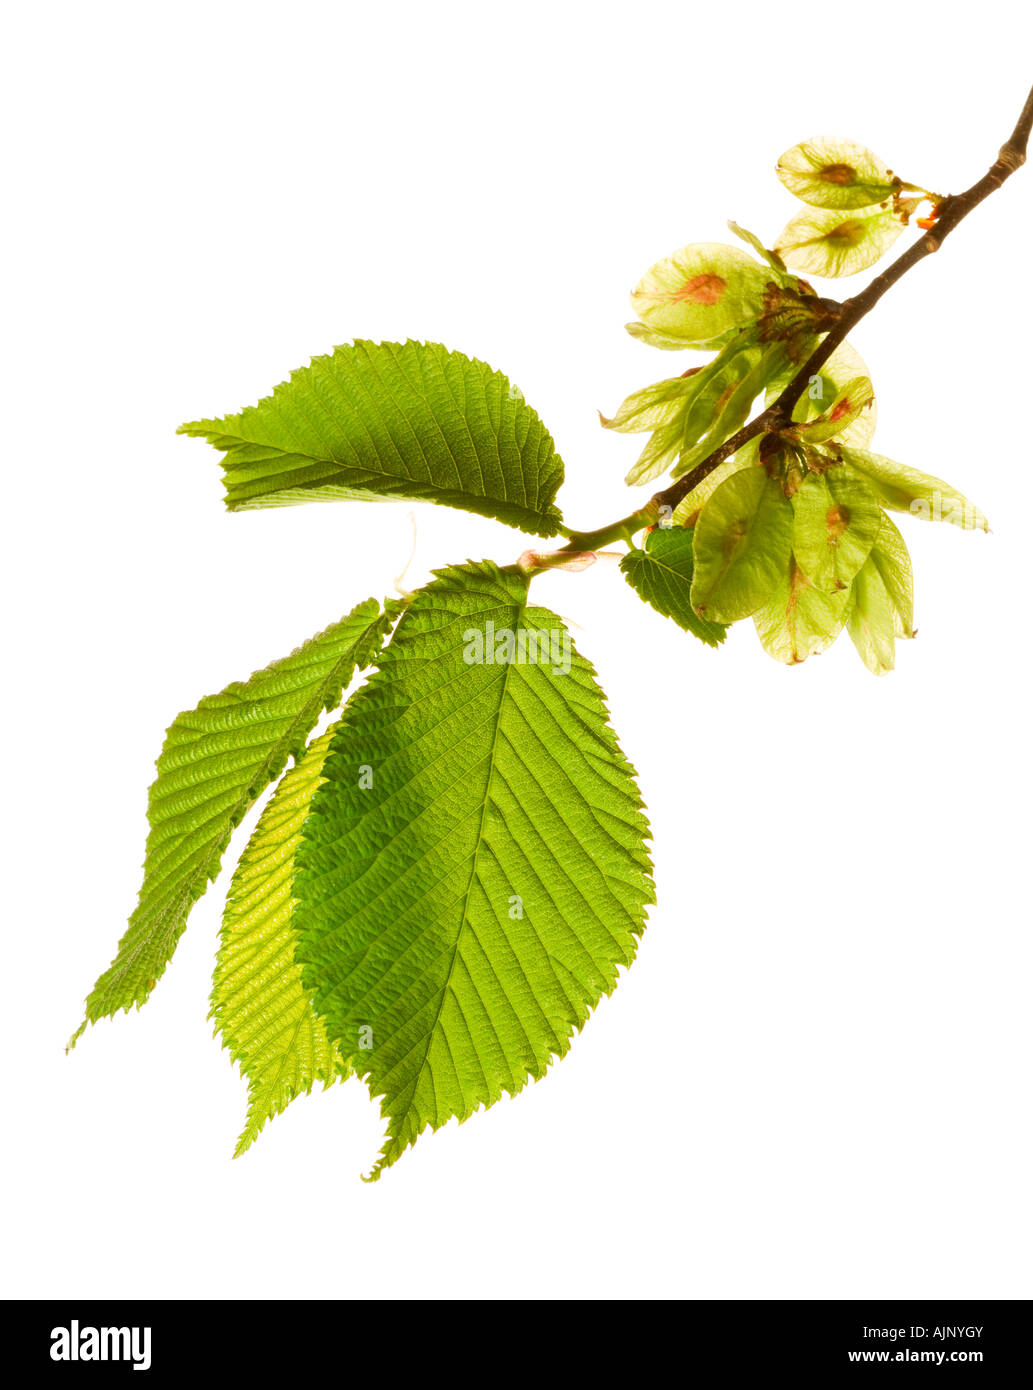 Wych elm leaves and fruit Stock Photo